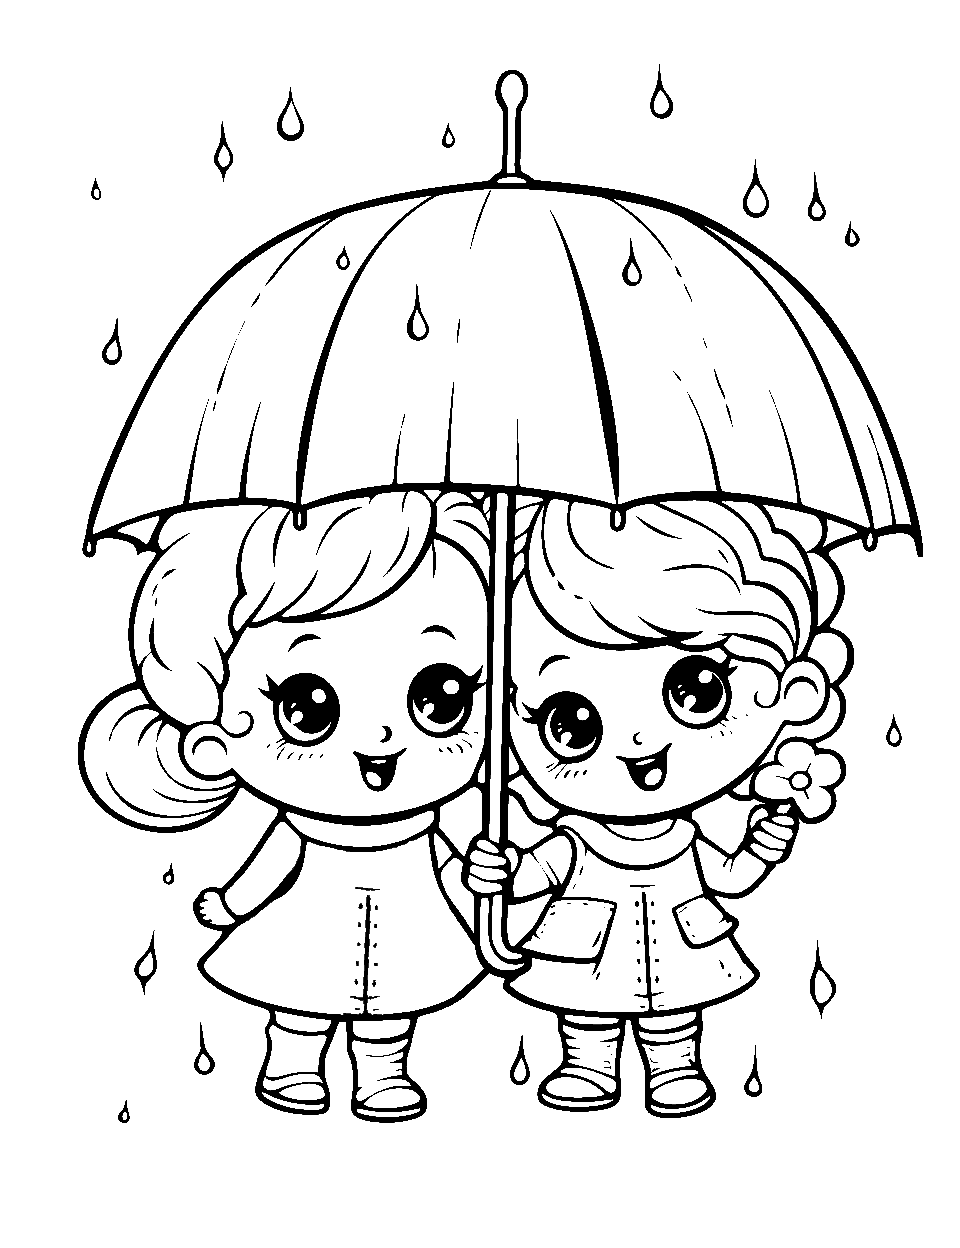 Rainy Day Play Coloring Page - Shopkins with their cute umbrellas, enjoying the rain.